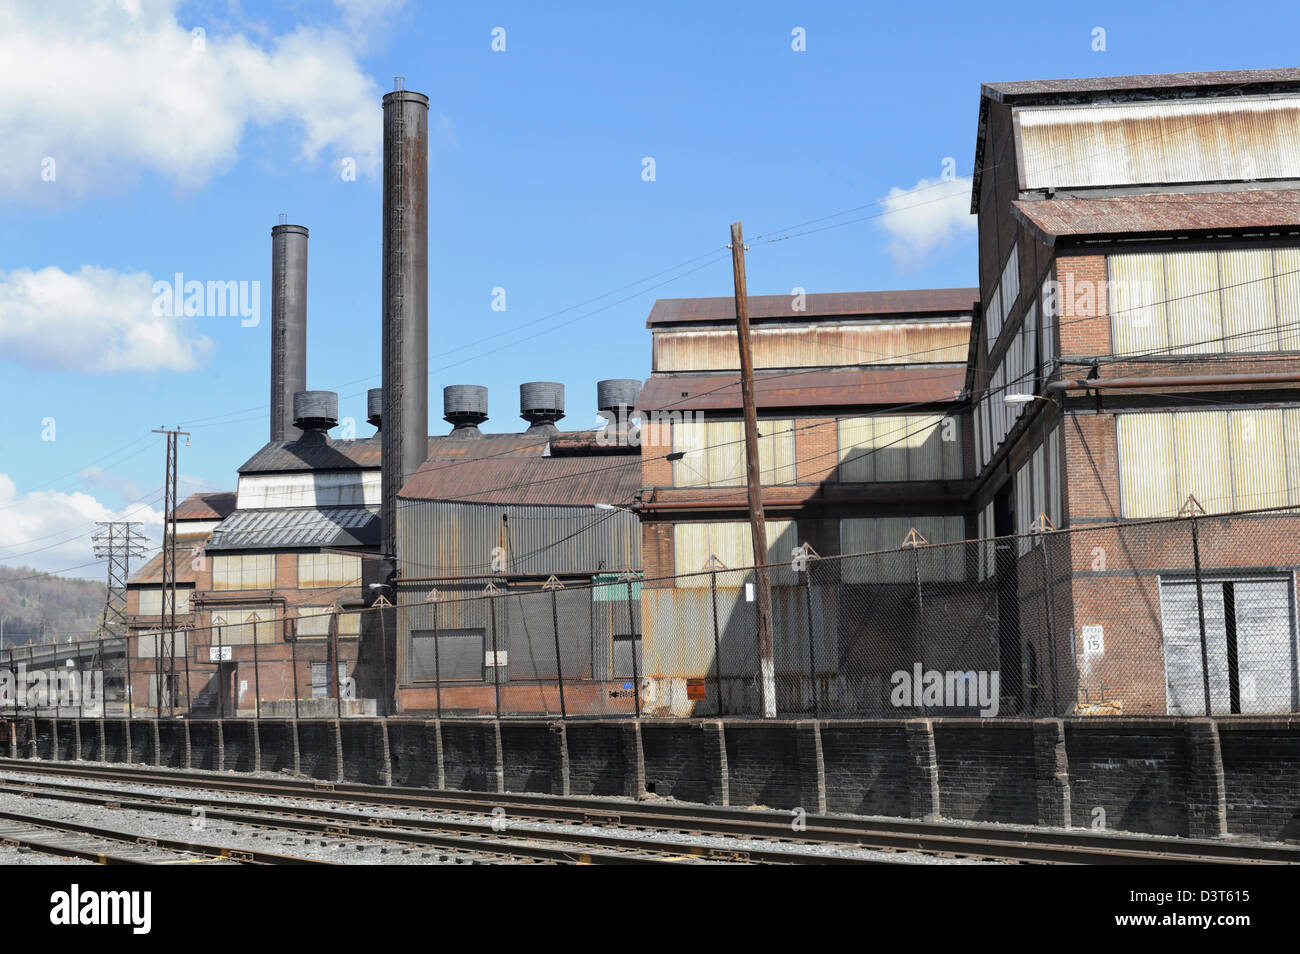 Steel mill buildings and railroad tracks close up, large metal buildings and smokestacks, the industrial rust belt in Johnstown, Stock Photo